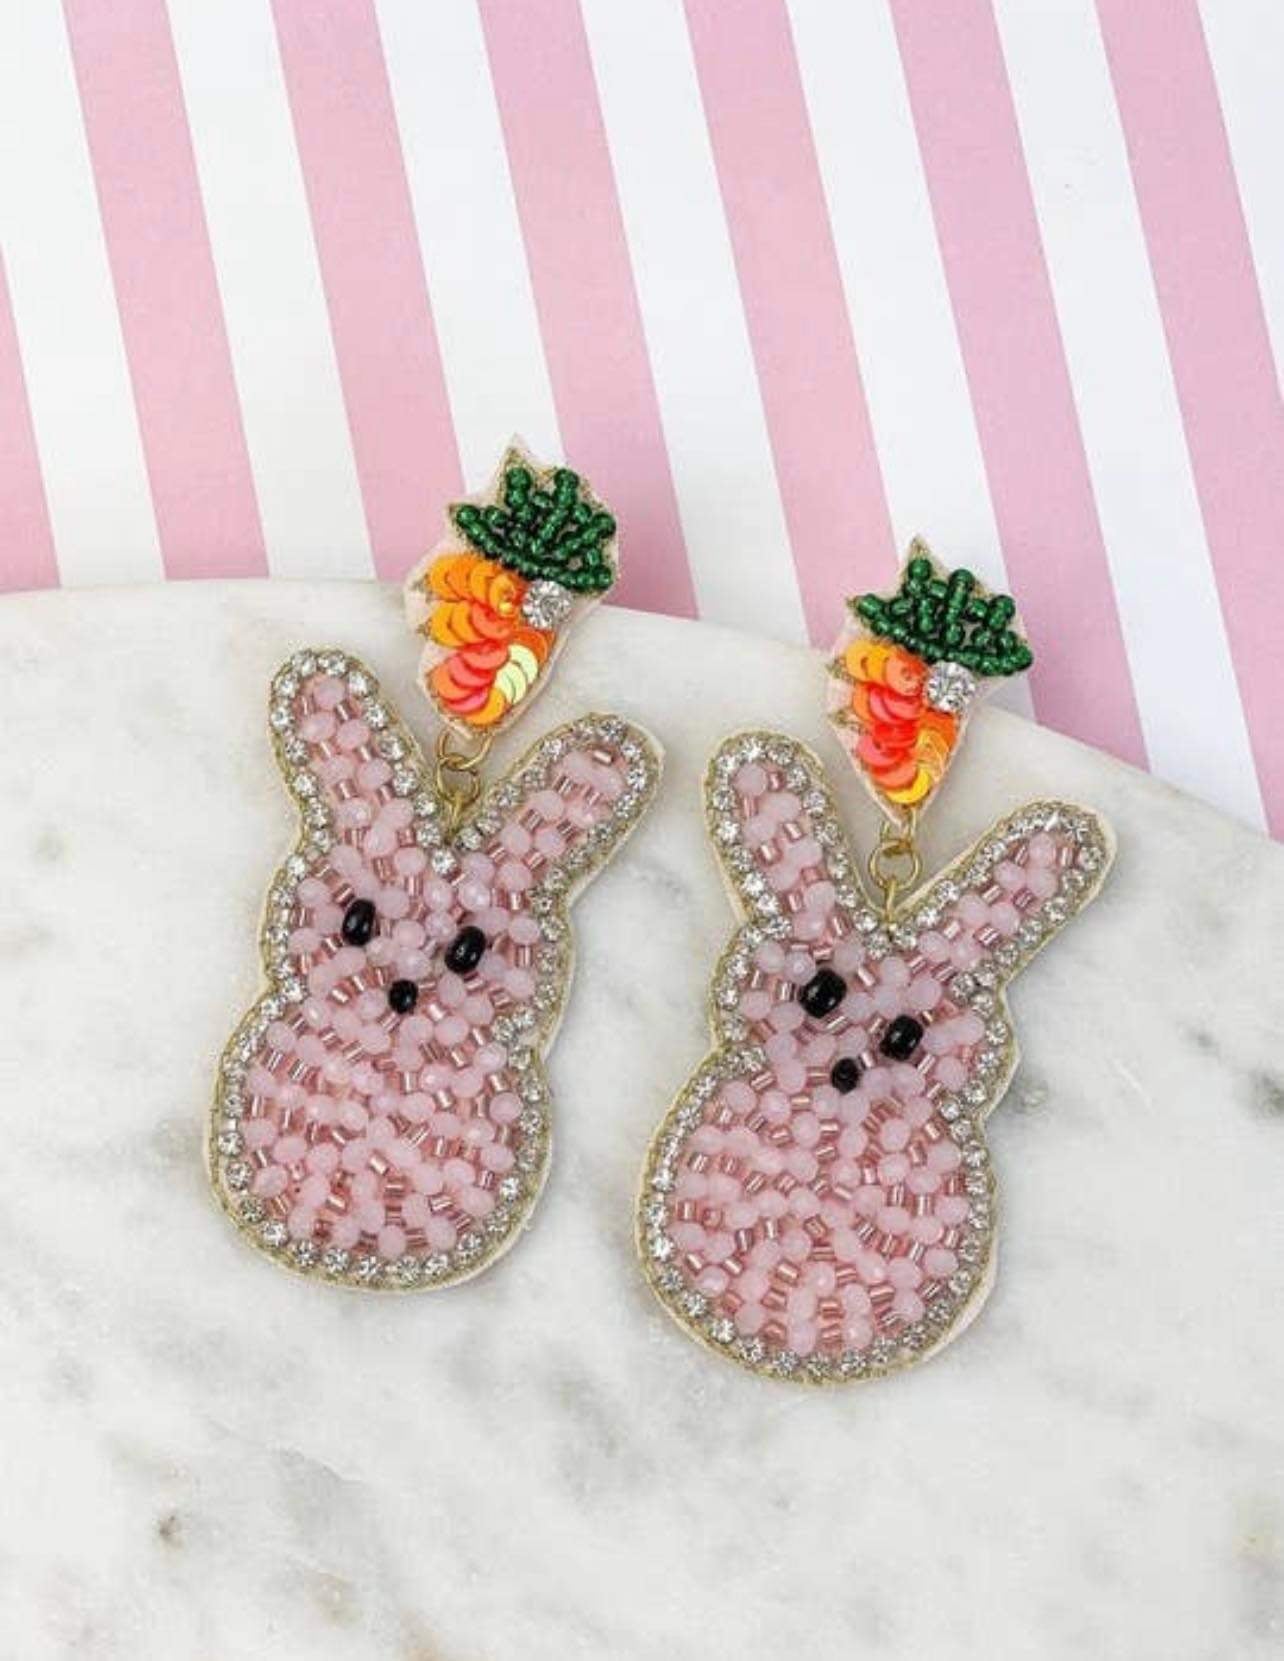 BUNNY BEADS PINK EARRINGS - Baby Bums Clothing 